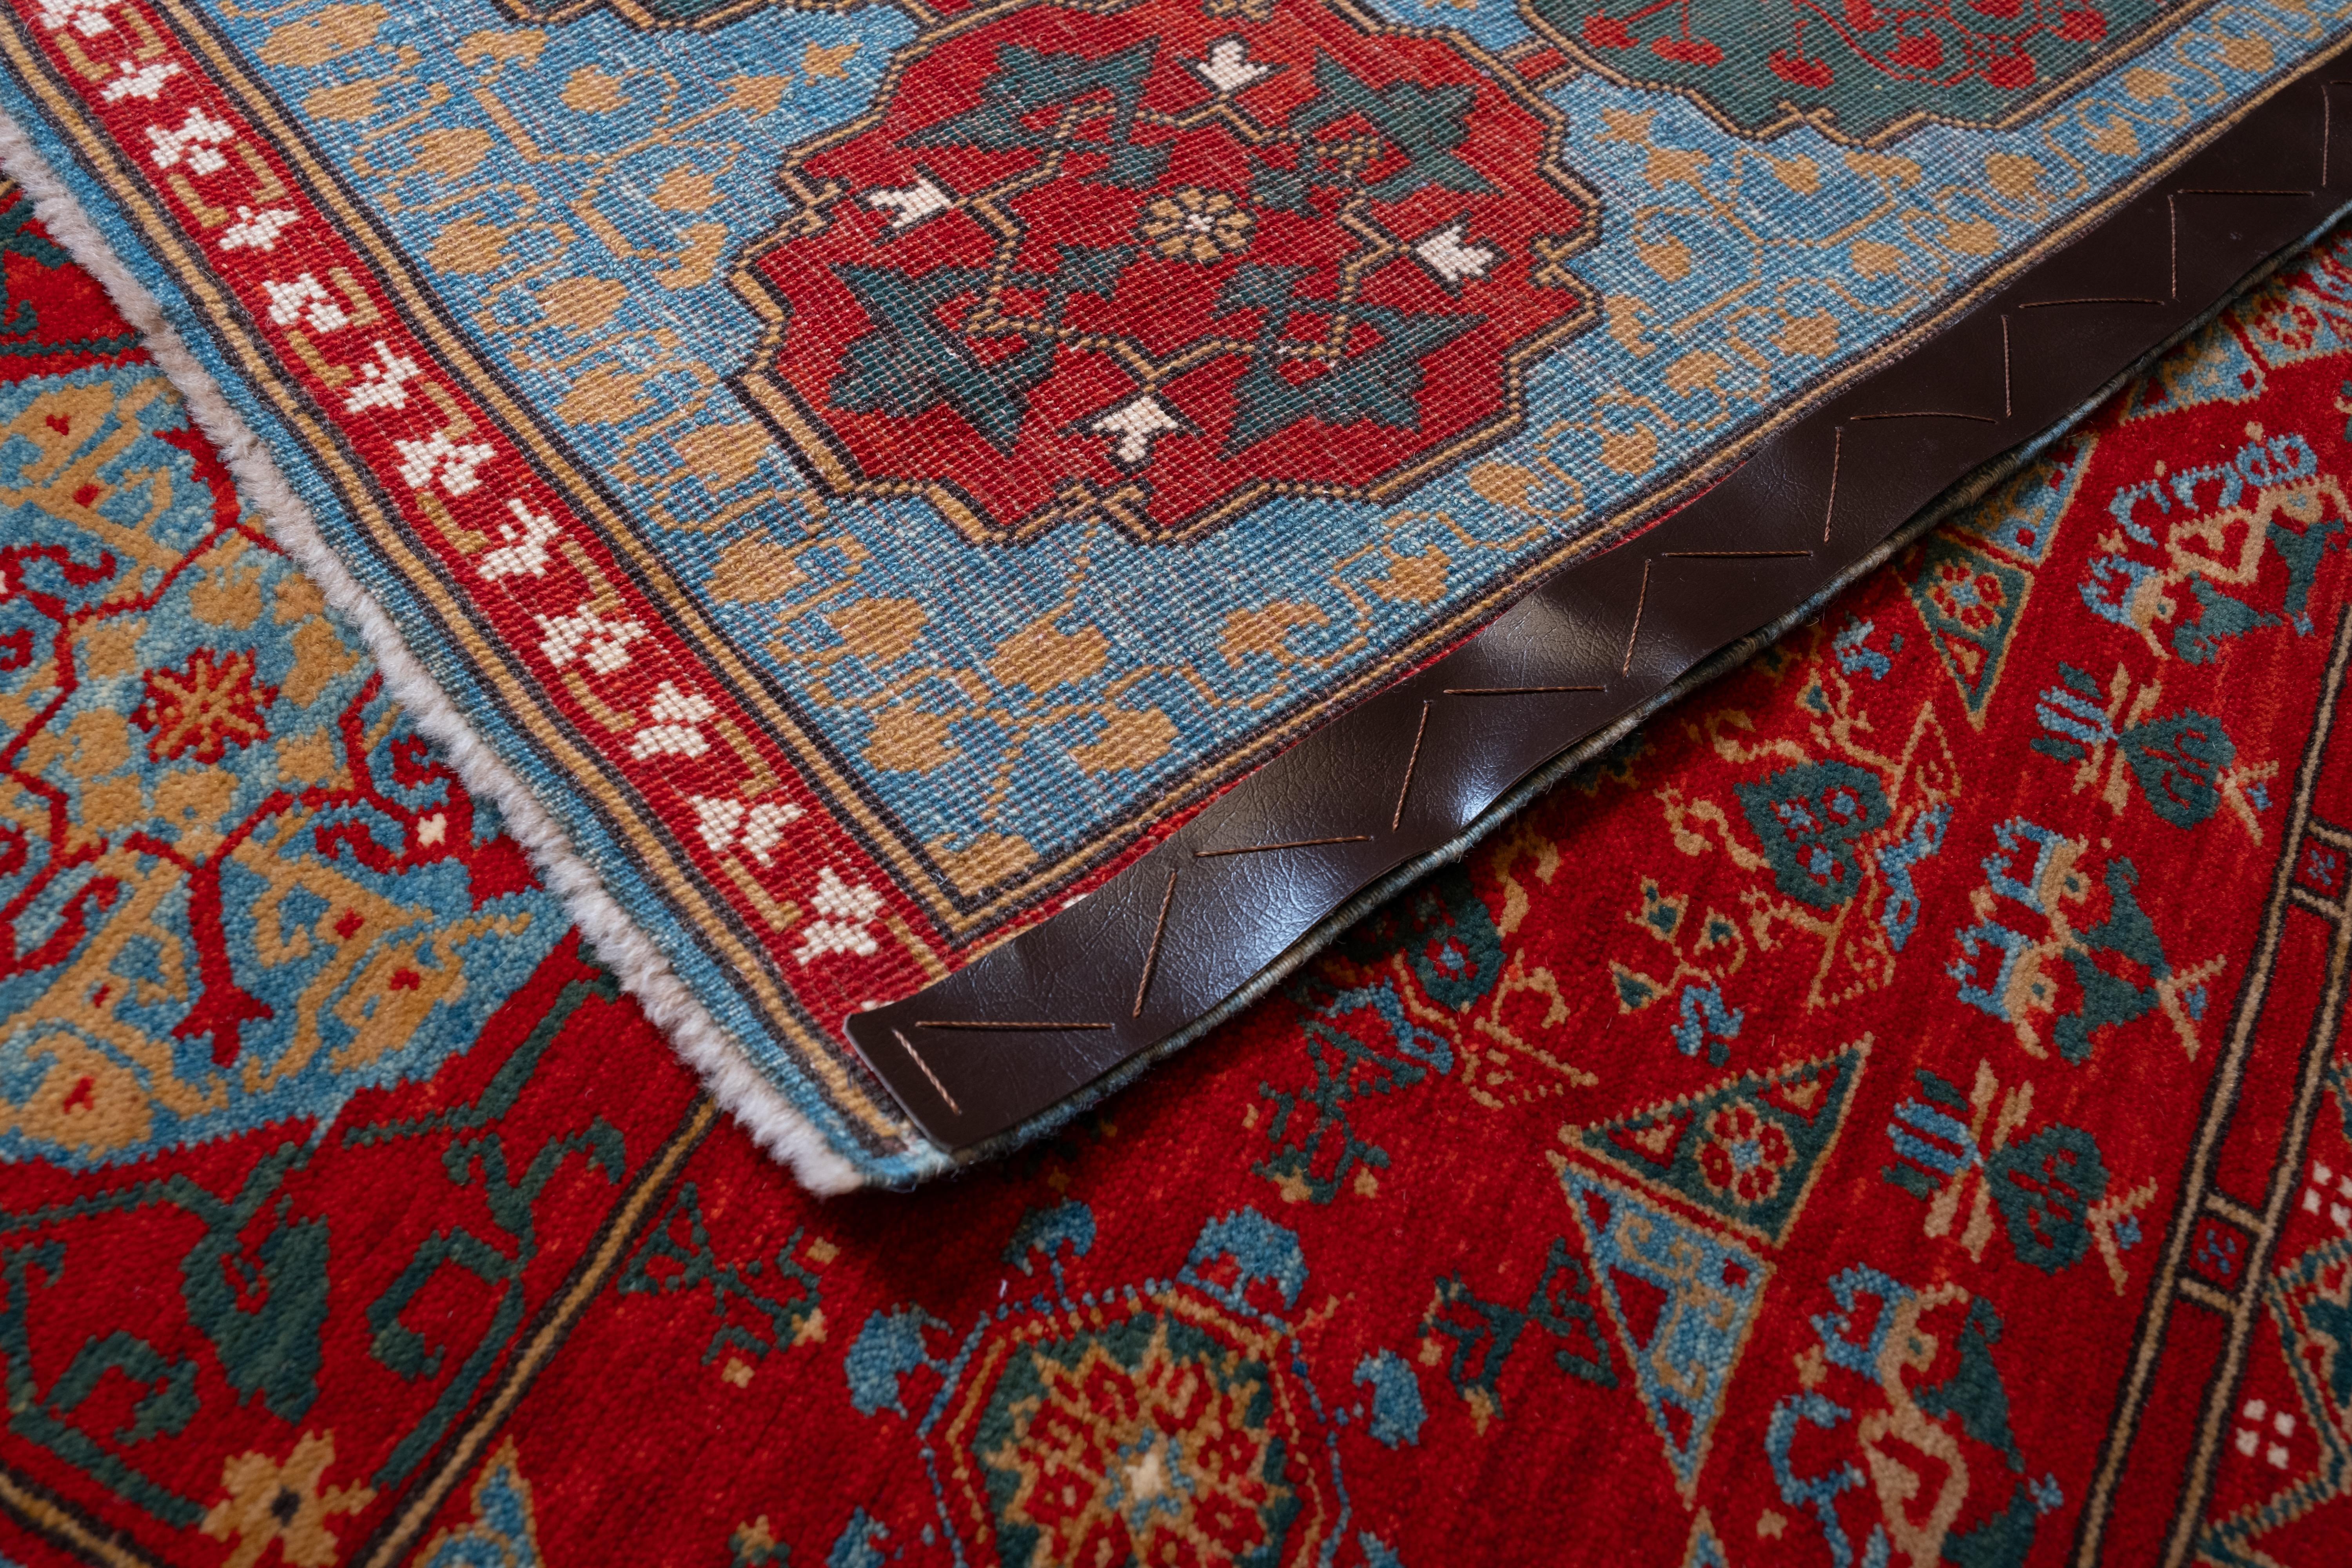 Vegetable Dyed Ararat Rugs The Simonetti Mamluk Carpet 16th C. Revival Rug, Square Natural Dyed For Sale